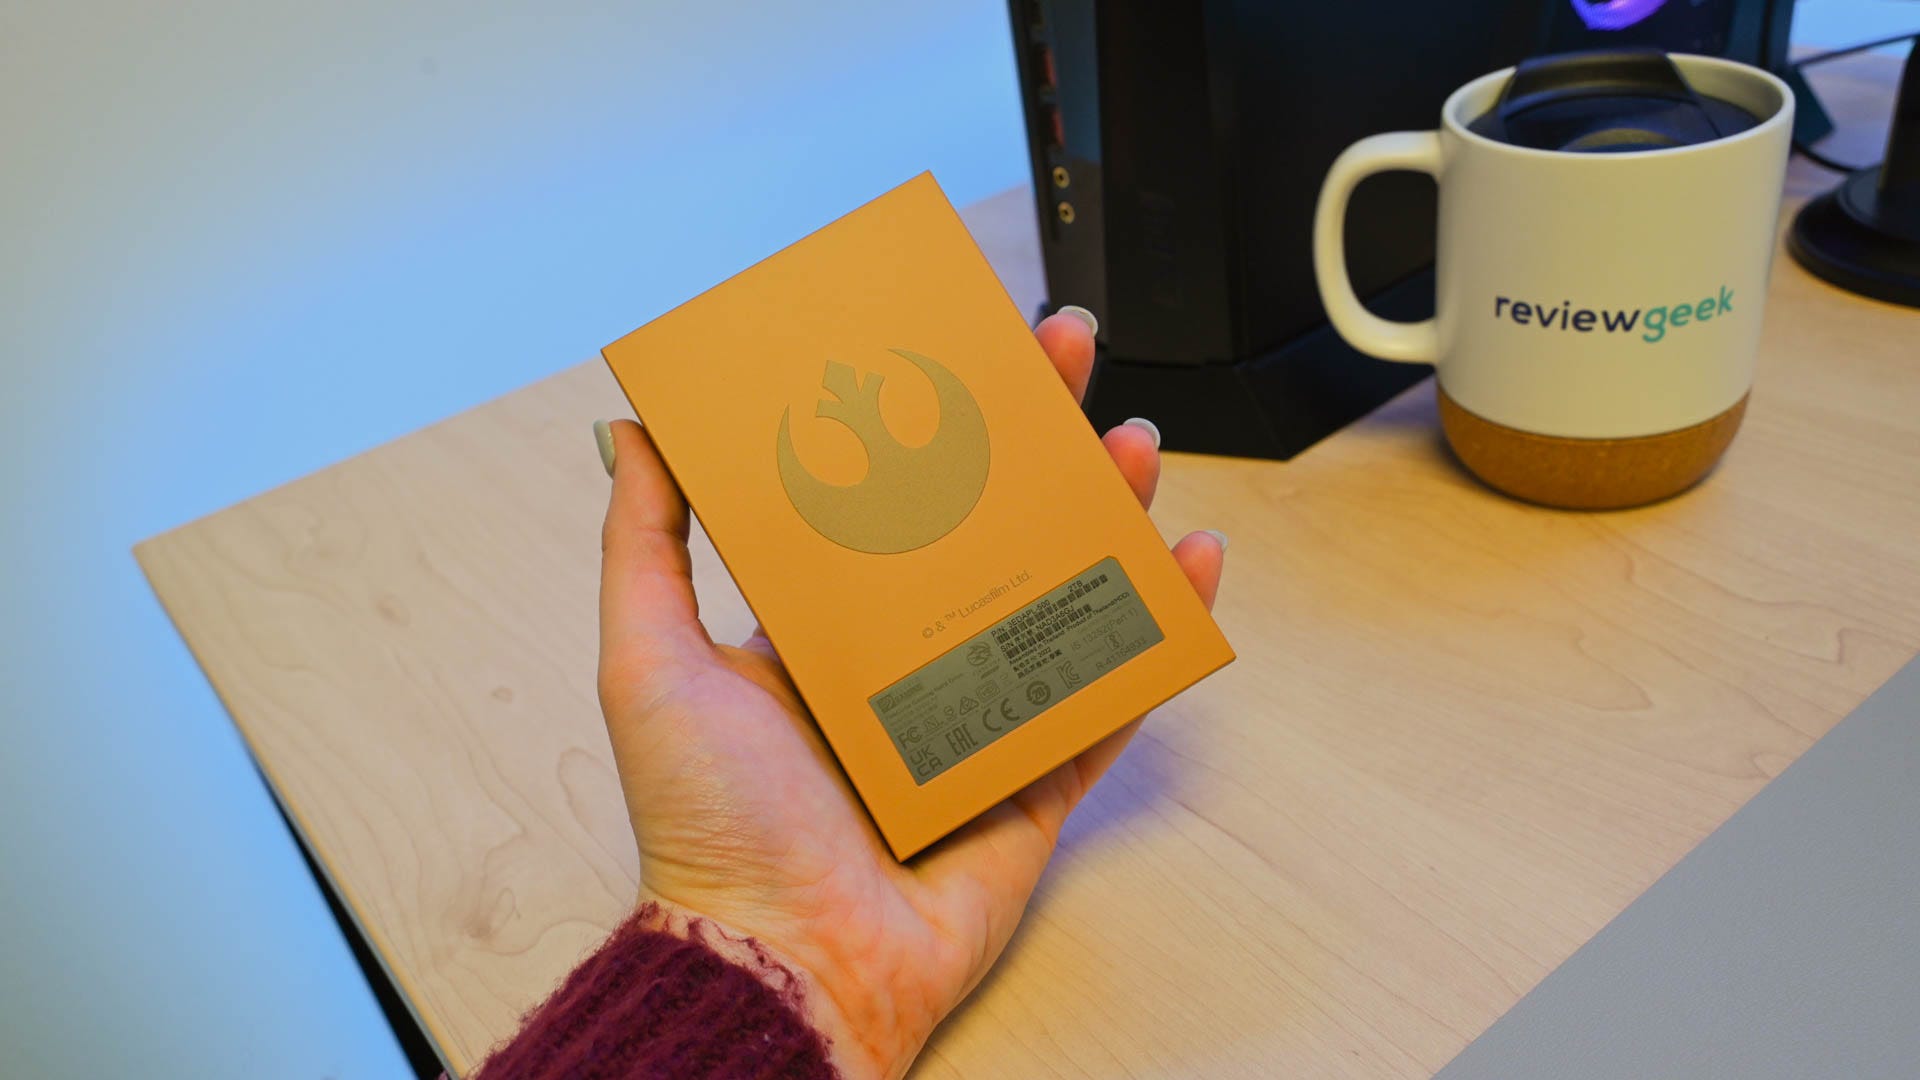 Seagate 2TB Luke Skywalker External HDD with yellow back and Rebel Alliance logo